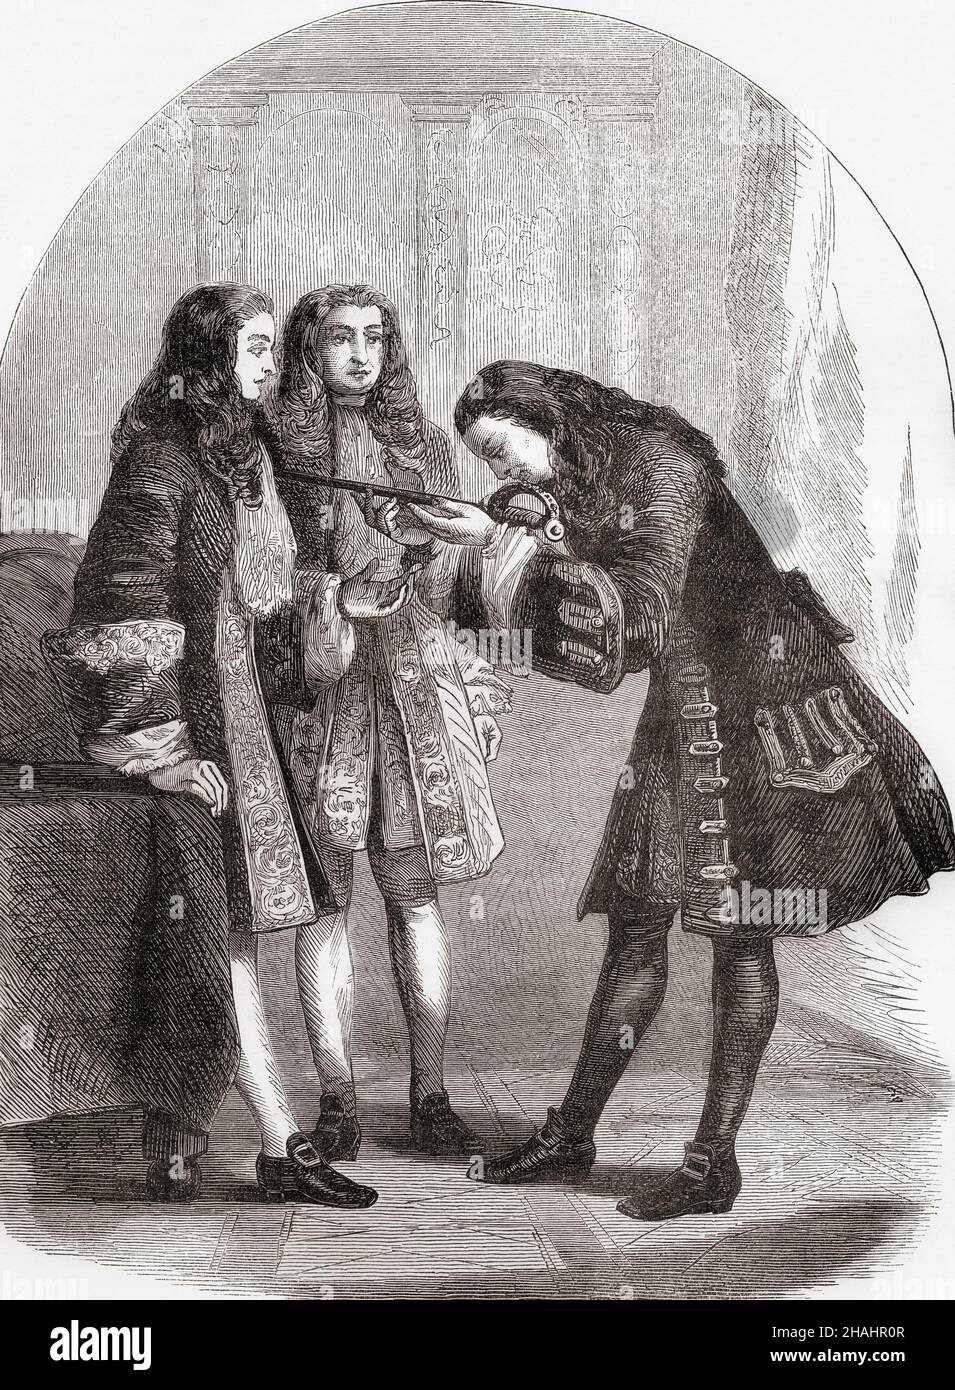 Archduke Charles, claimant to the Spanish throne after the death of Charles II in 1700, presents his sword to the Duke of Marlborough who had been commissioned by Queen Anne to present his congratulations.  Charles VI, right, 1685 –1740. Holy Roman Emperor and ruler of the Austrian Habsburg Monarchy.  General John Churchill, 1st Duke of Marlborough, 1st Prince of Mindelheim, 1st Count of Nellenburg, Prince of the Holy Roman Empire, 1650 – 1722. English soldier and statesman.  From Cassell's Illustrated History of England, published c.1890. Stock Photo